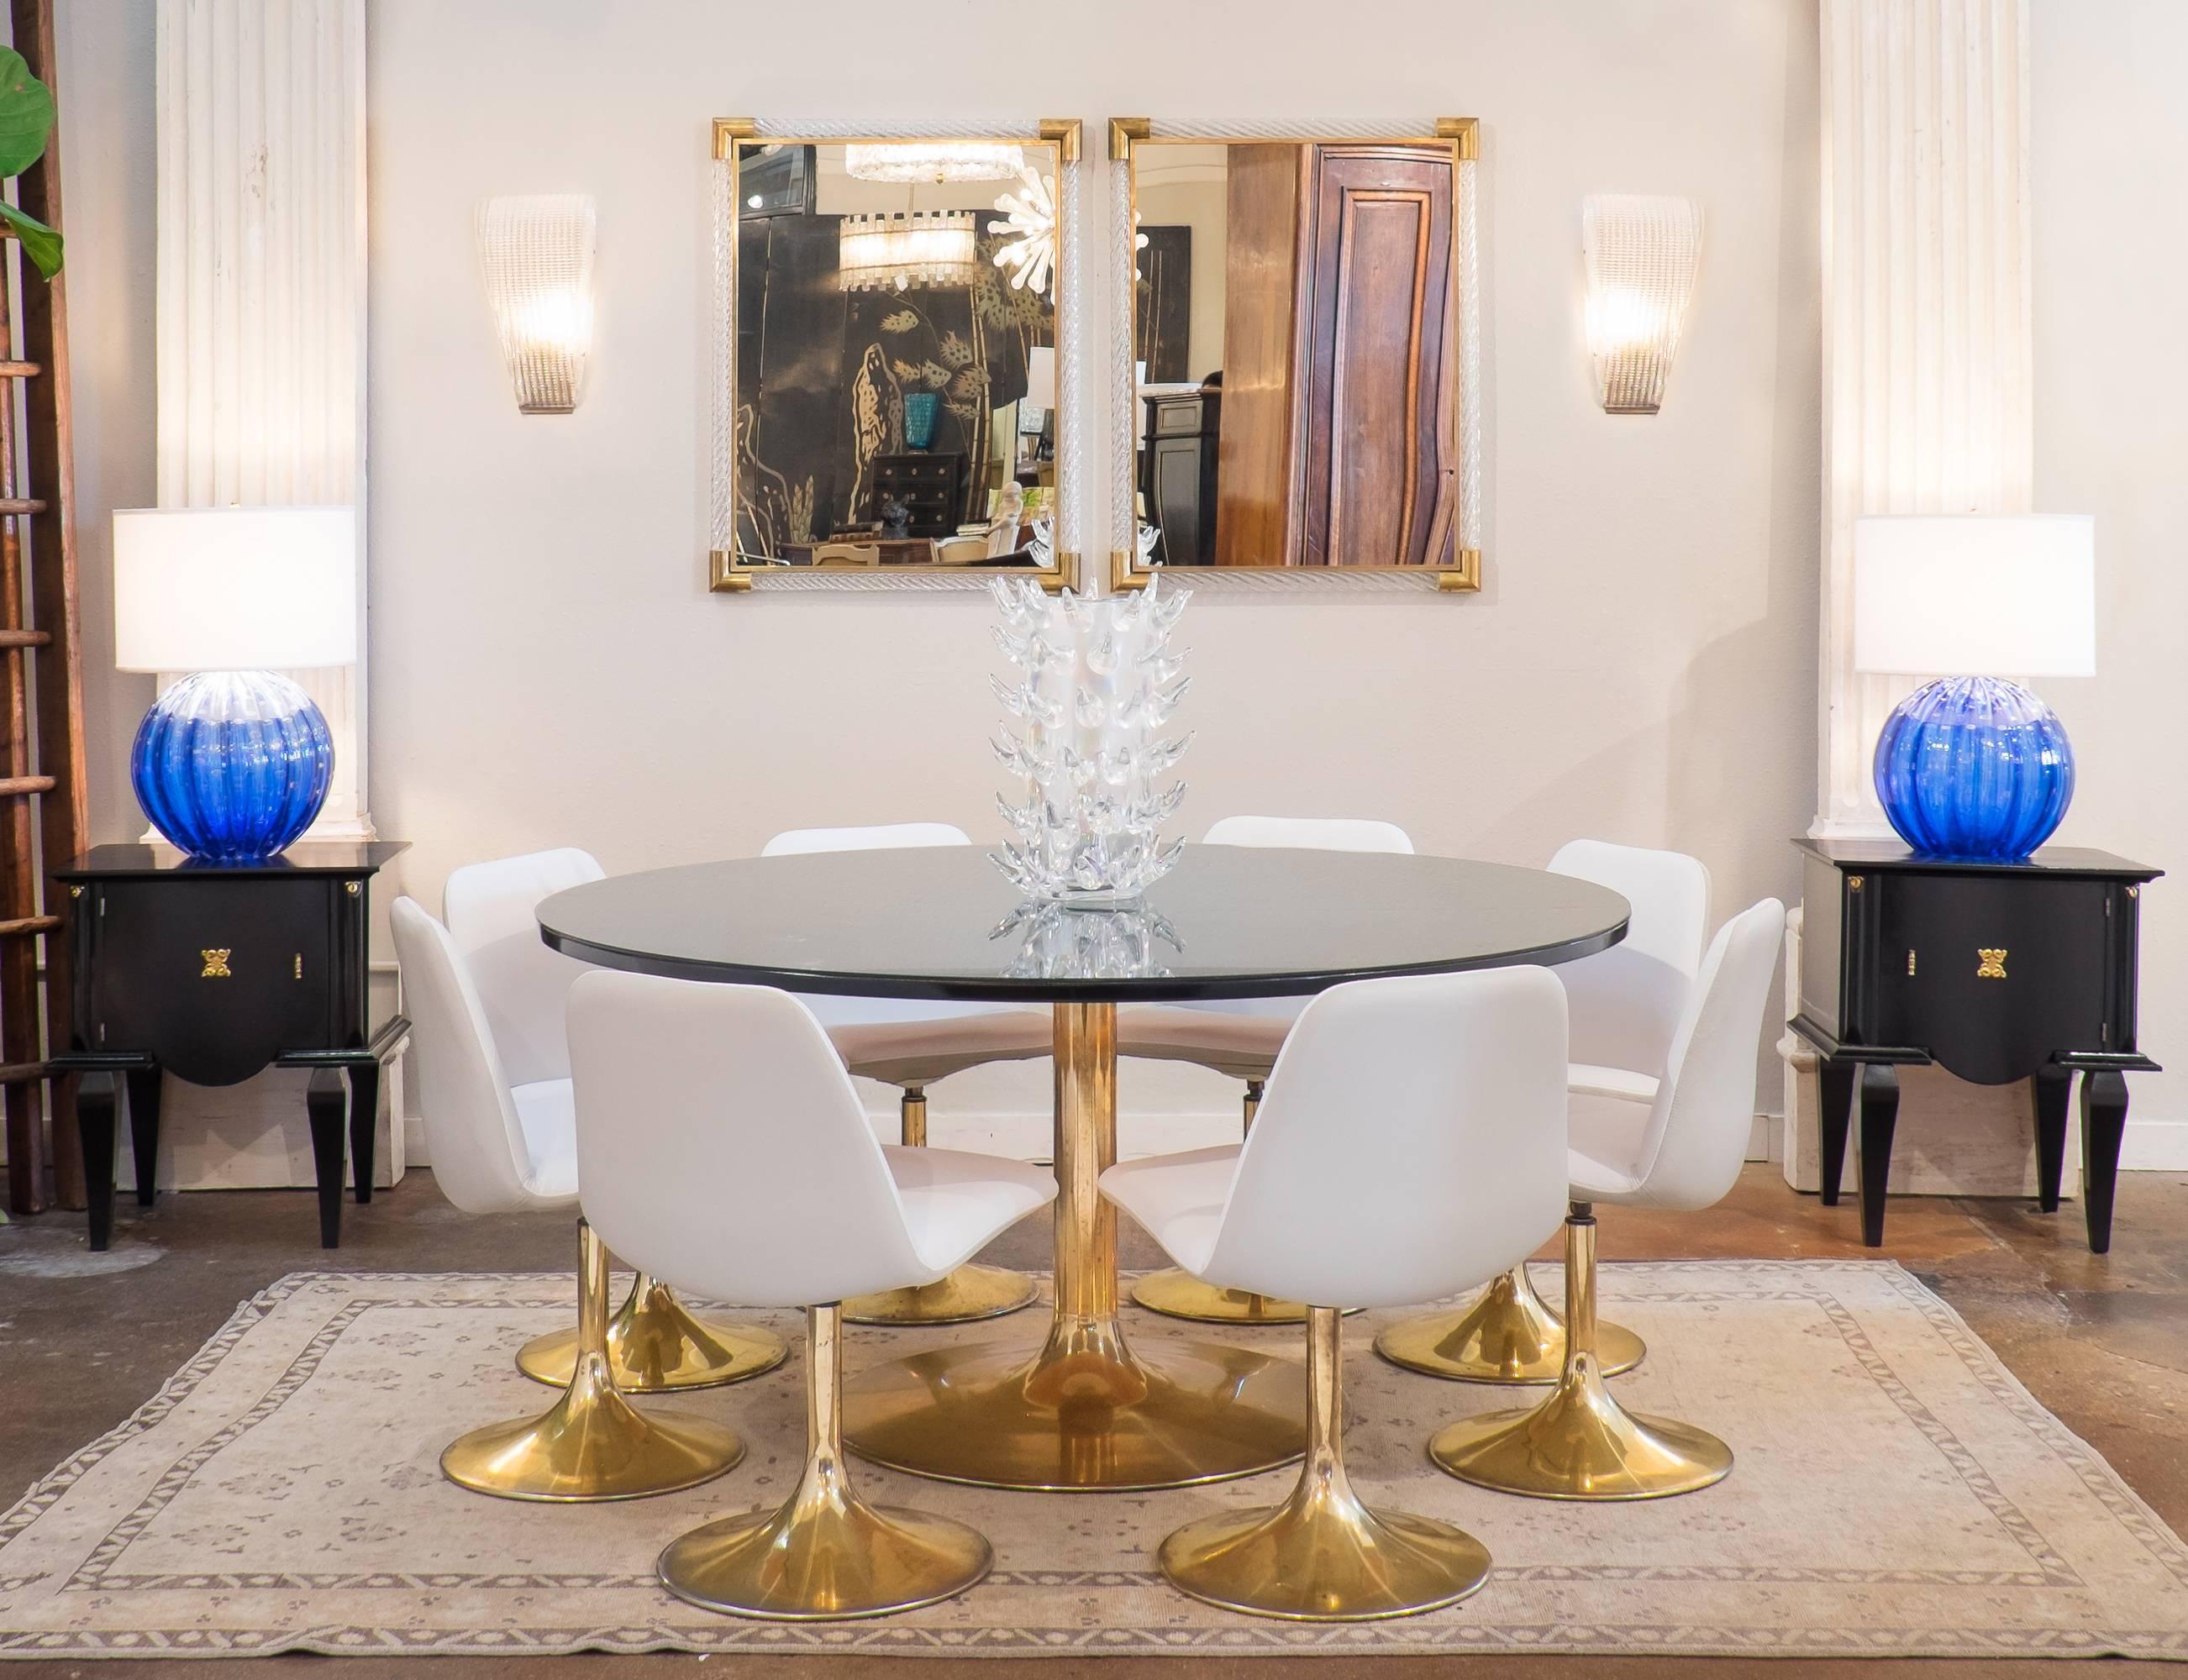 Sumptuous and rare set in great condition, eight chairs and table with solid brass iconic tulip foot. The table is 59